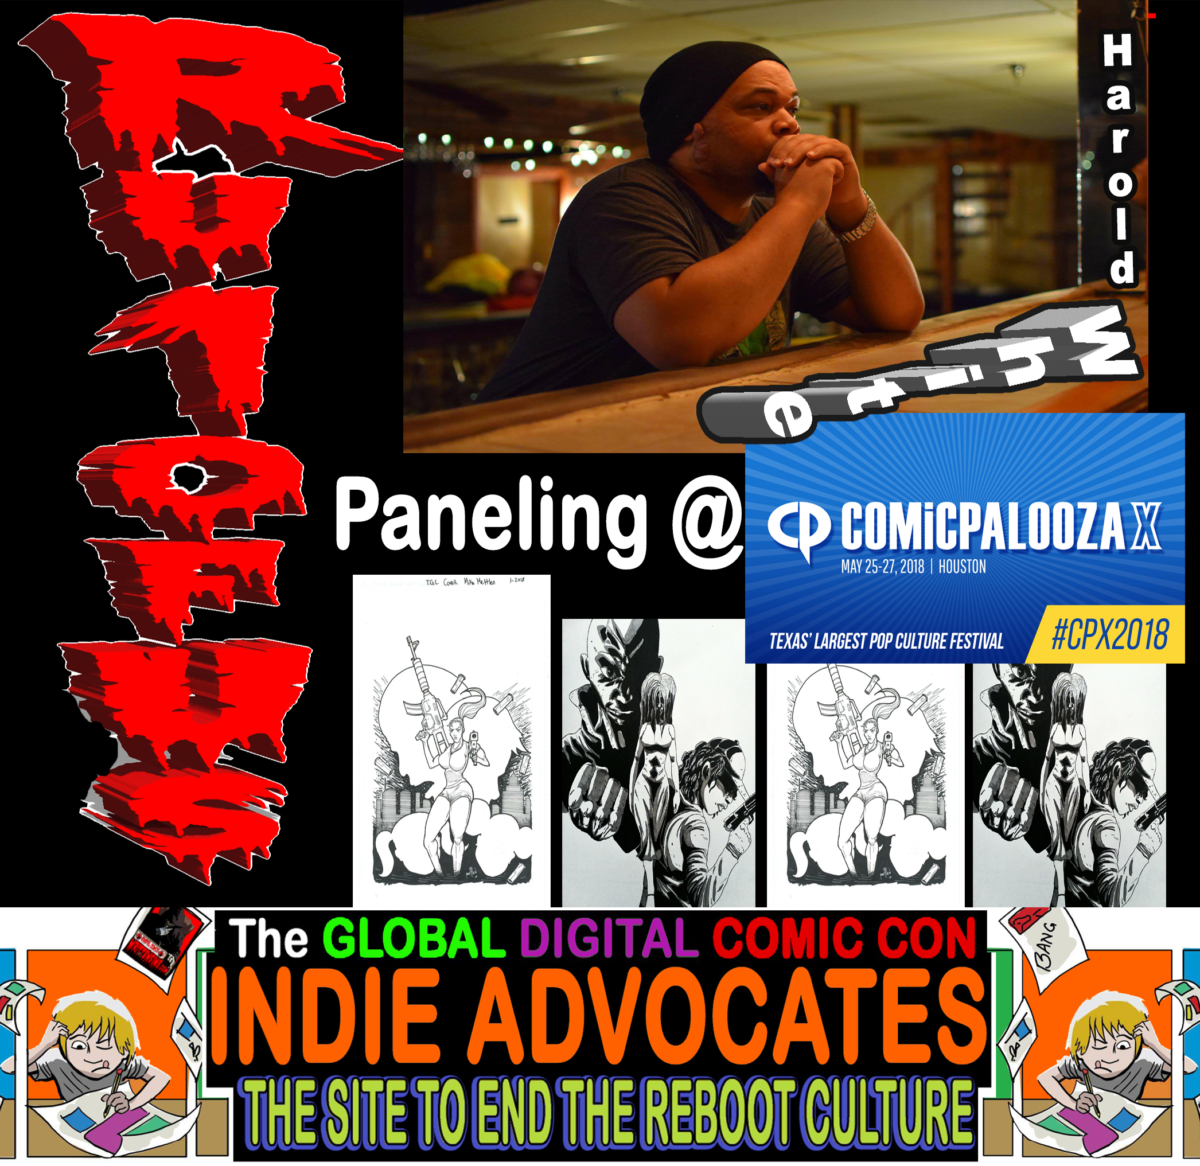 COMIC CON HIGHWAY SOUTHERN EXIT::  -TX- HAROLD WHITE Panels out at Comcipalooza  .  .